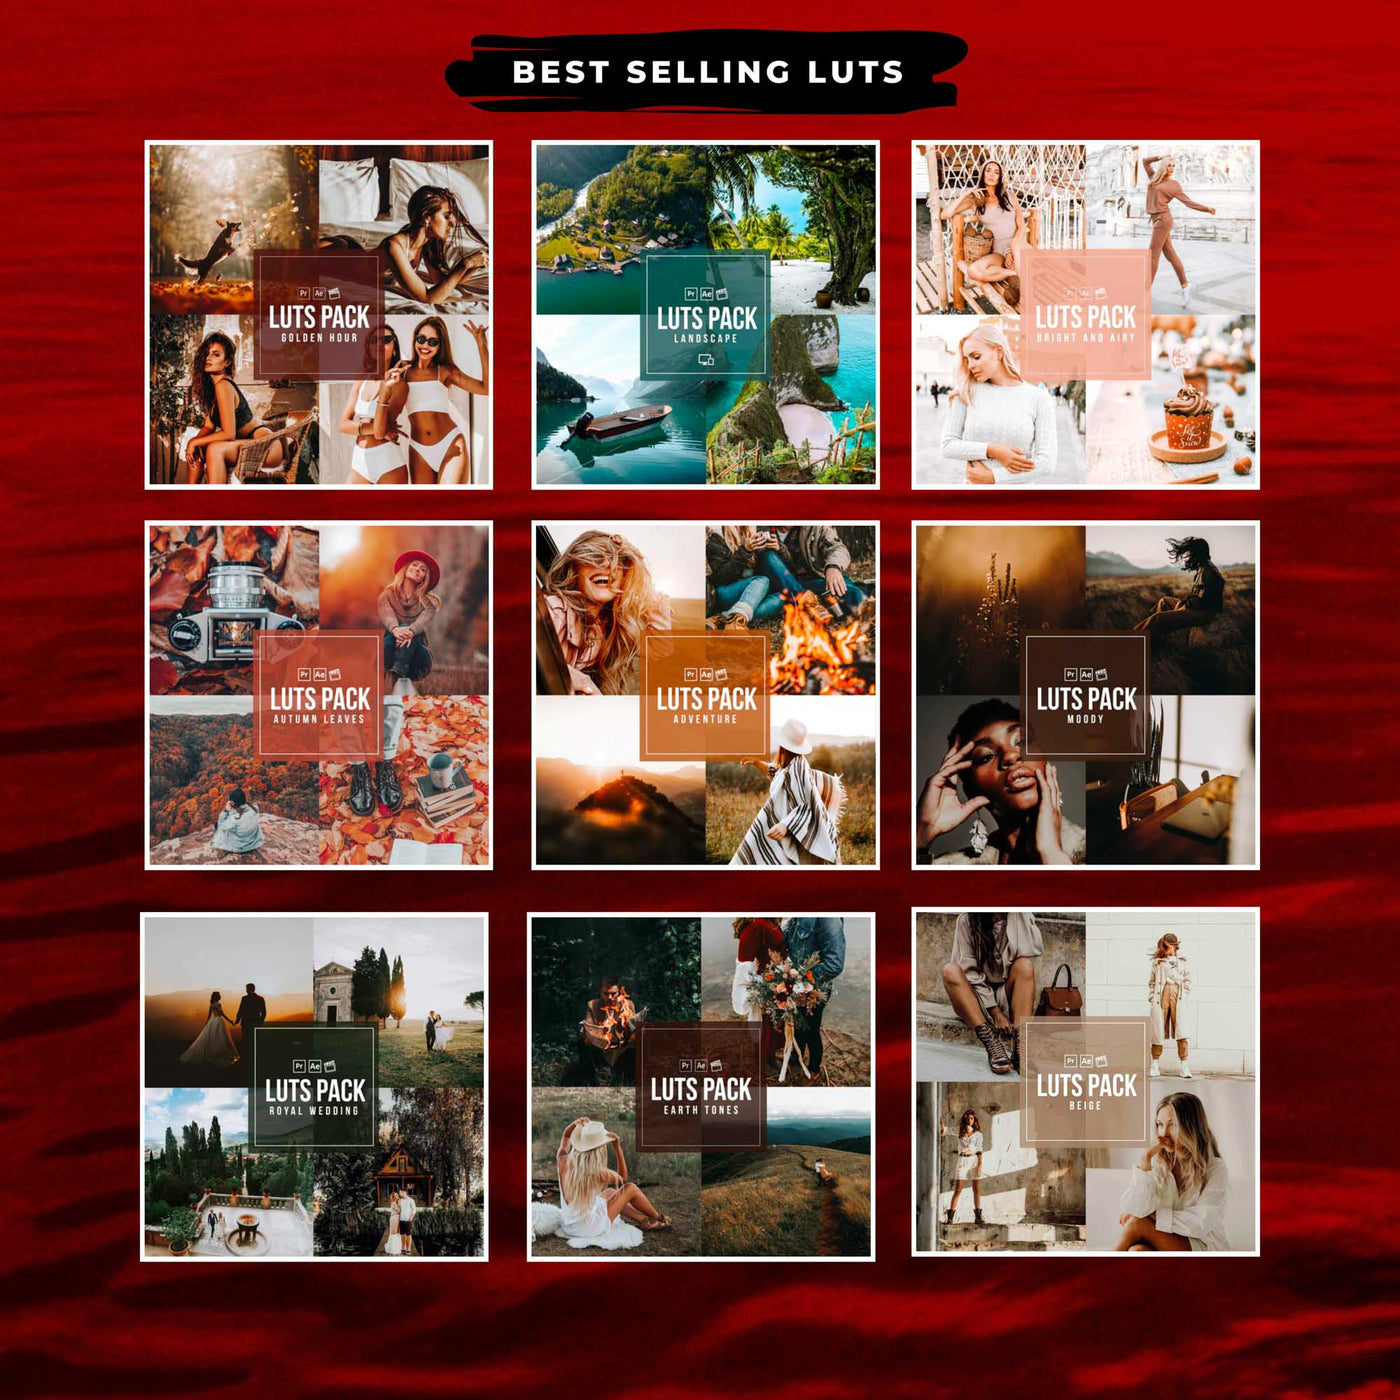 BLACK FRIDAY EXCLUSIVE: THE ULTIMATE 700+ PRESETS MEGA-VALUE COLLECTION